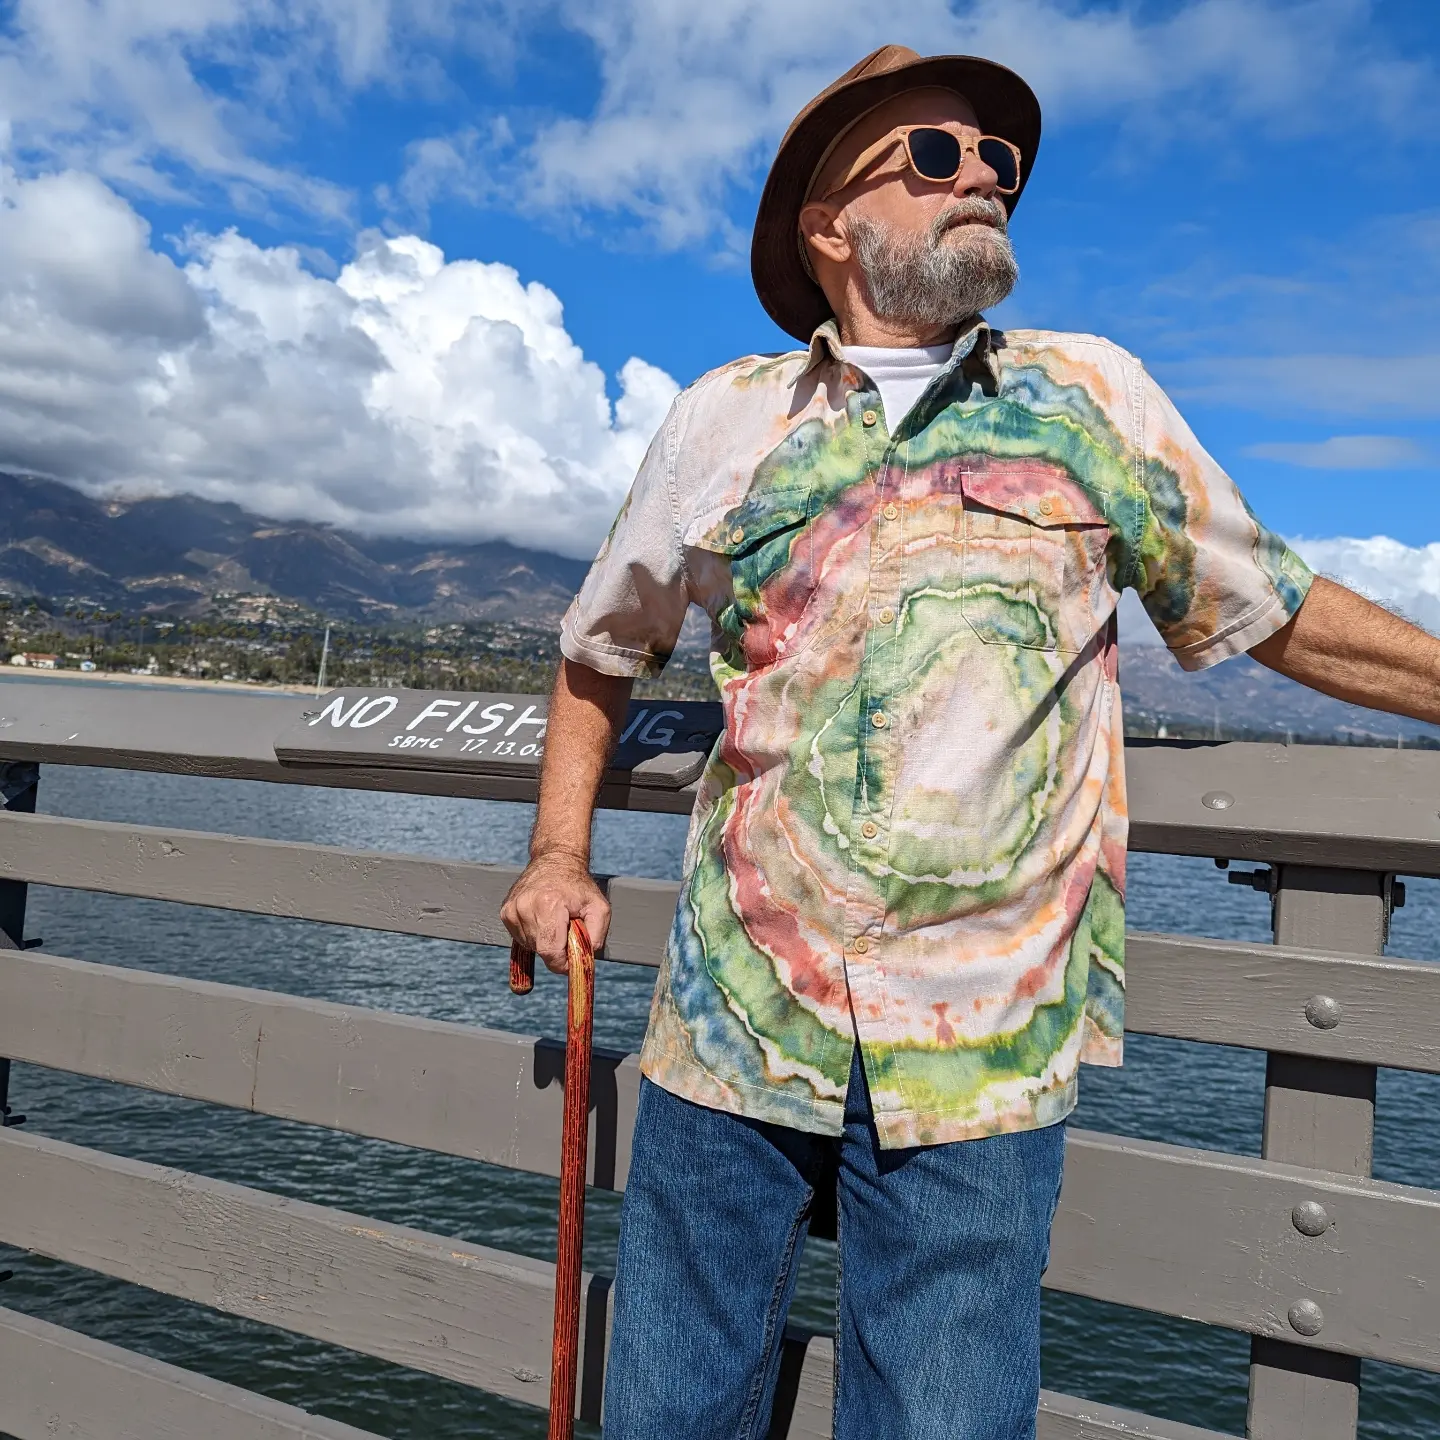 a man standing on a pier holding a cane.